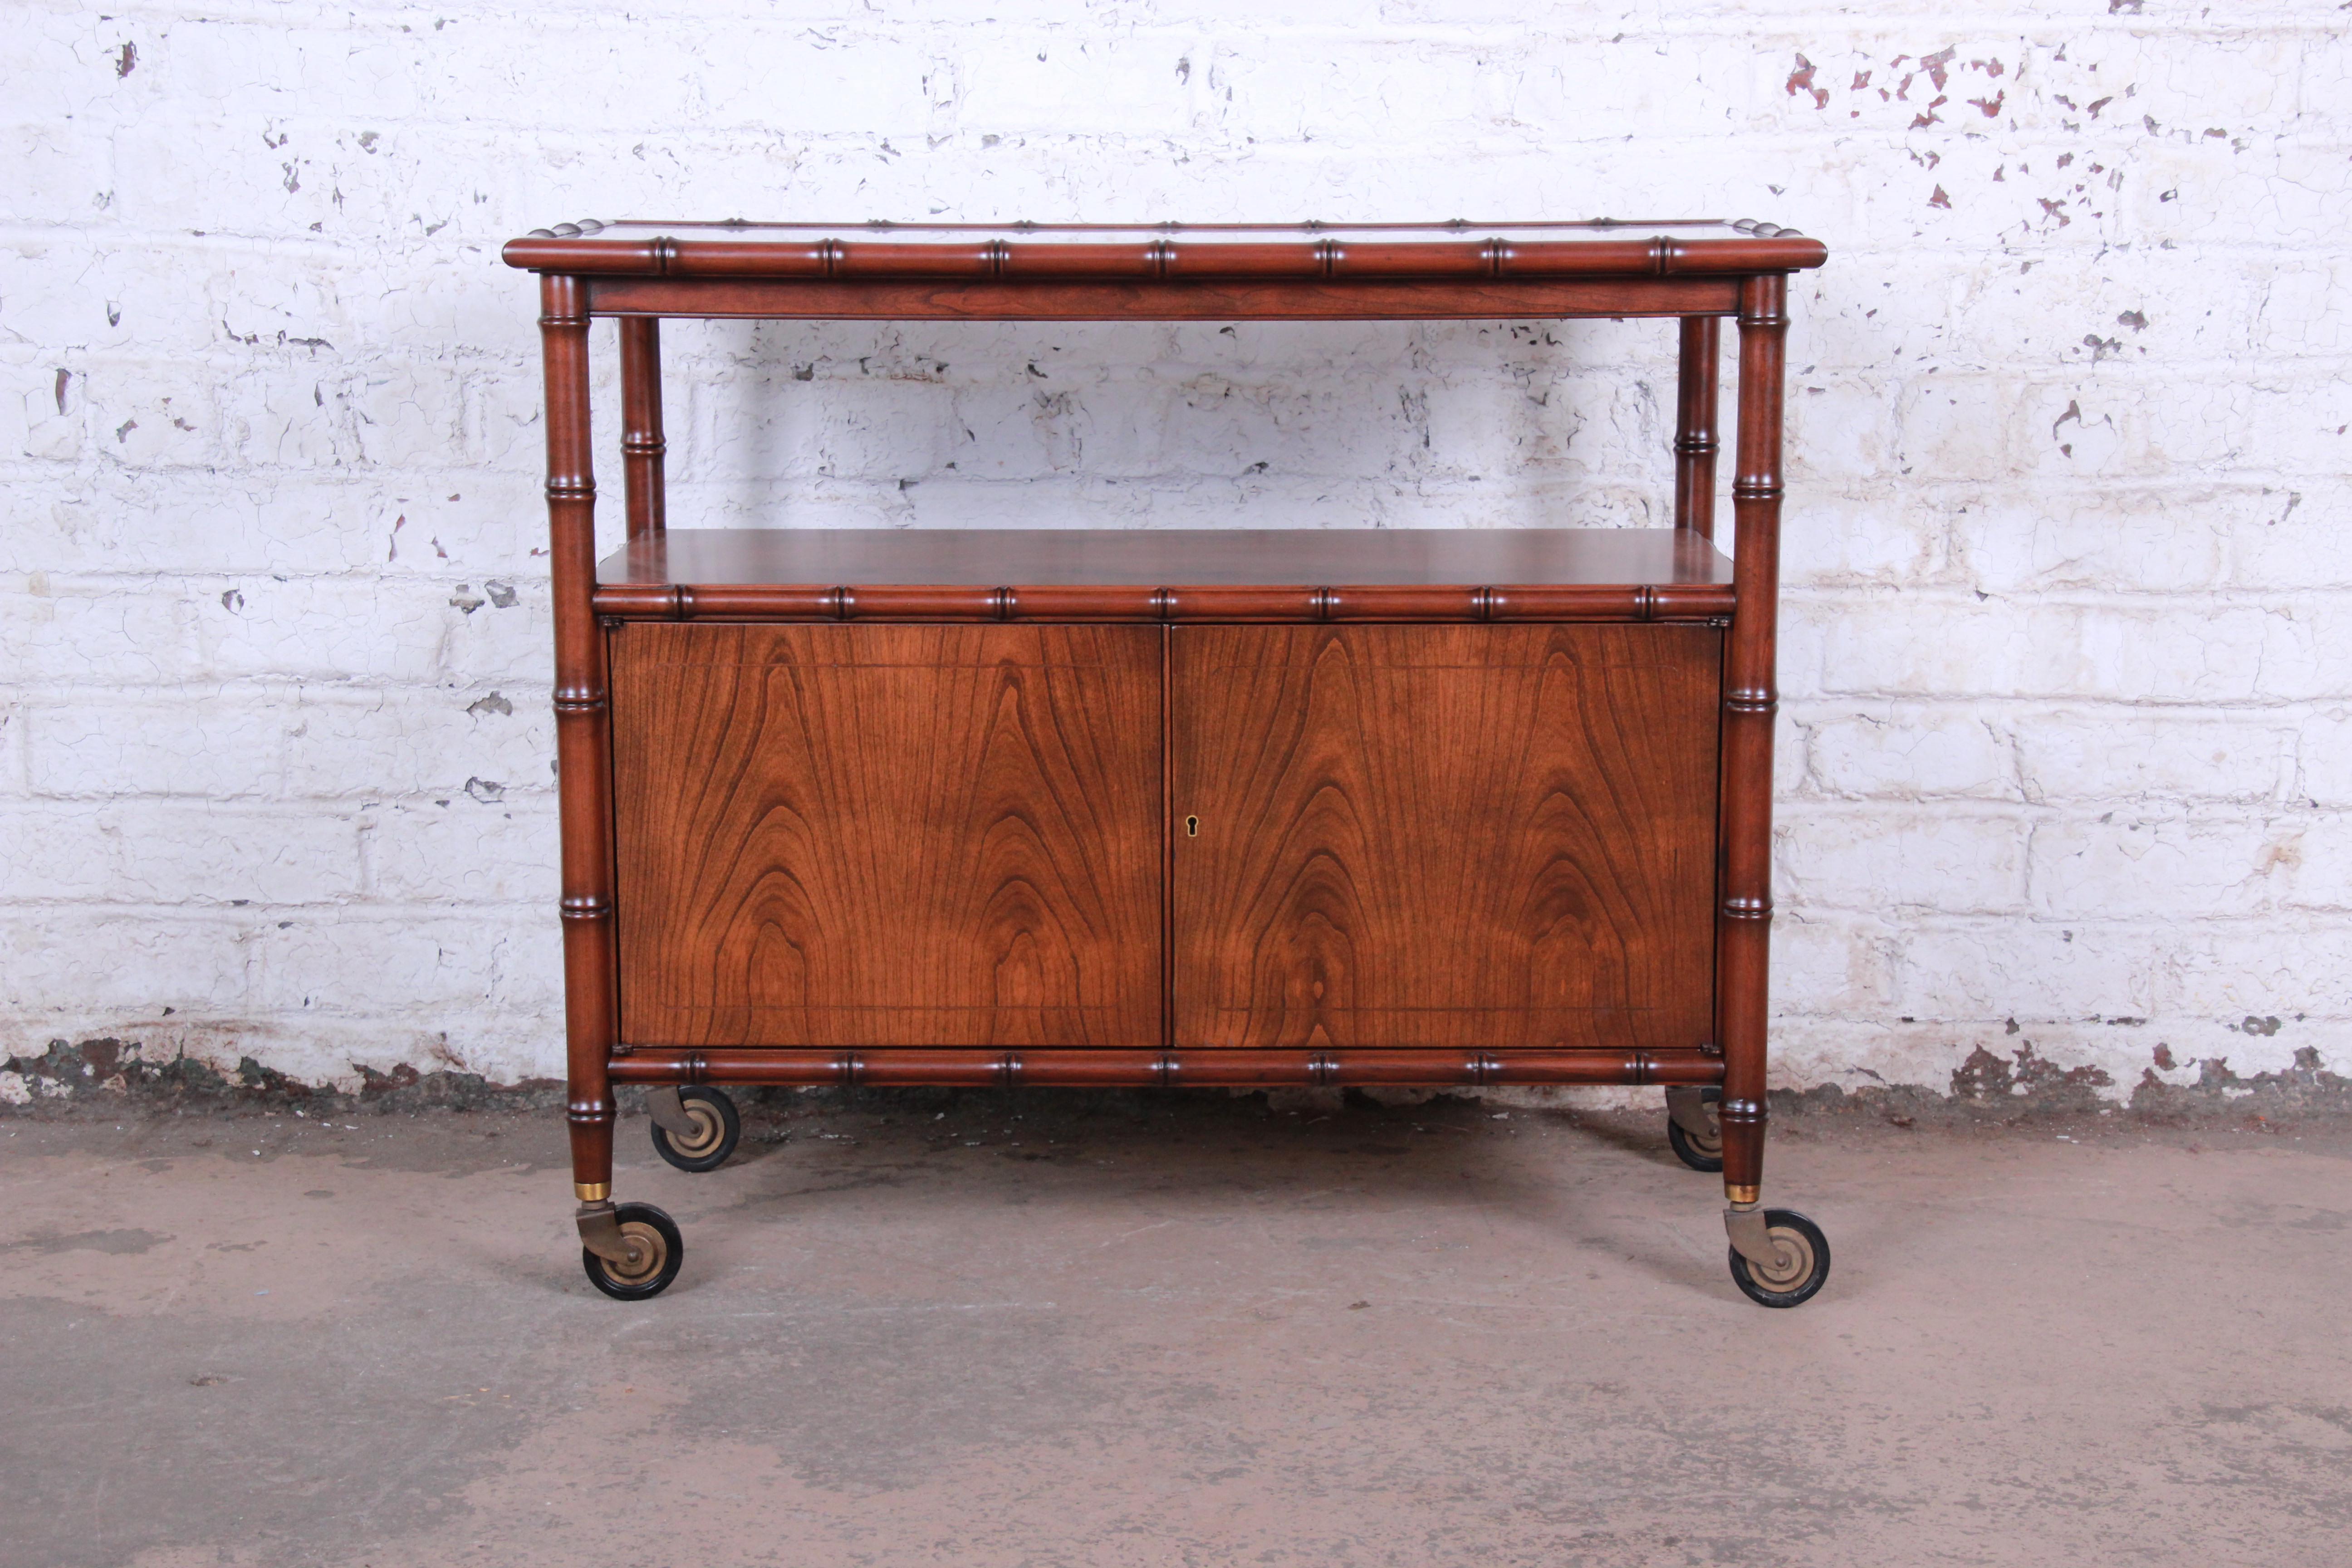 A gorgeous Mid-Century Modern Hollywood Regency bar cart by Baker Furniture. The cart features stunning book-matched walnut wood grain, with a unique faux bamboo frame. It offers good storage and serving space, with a black laminate top that extends